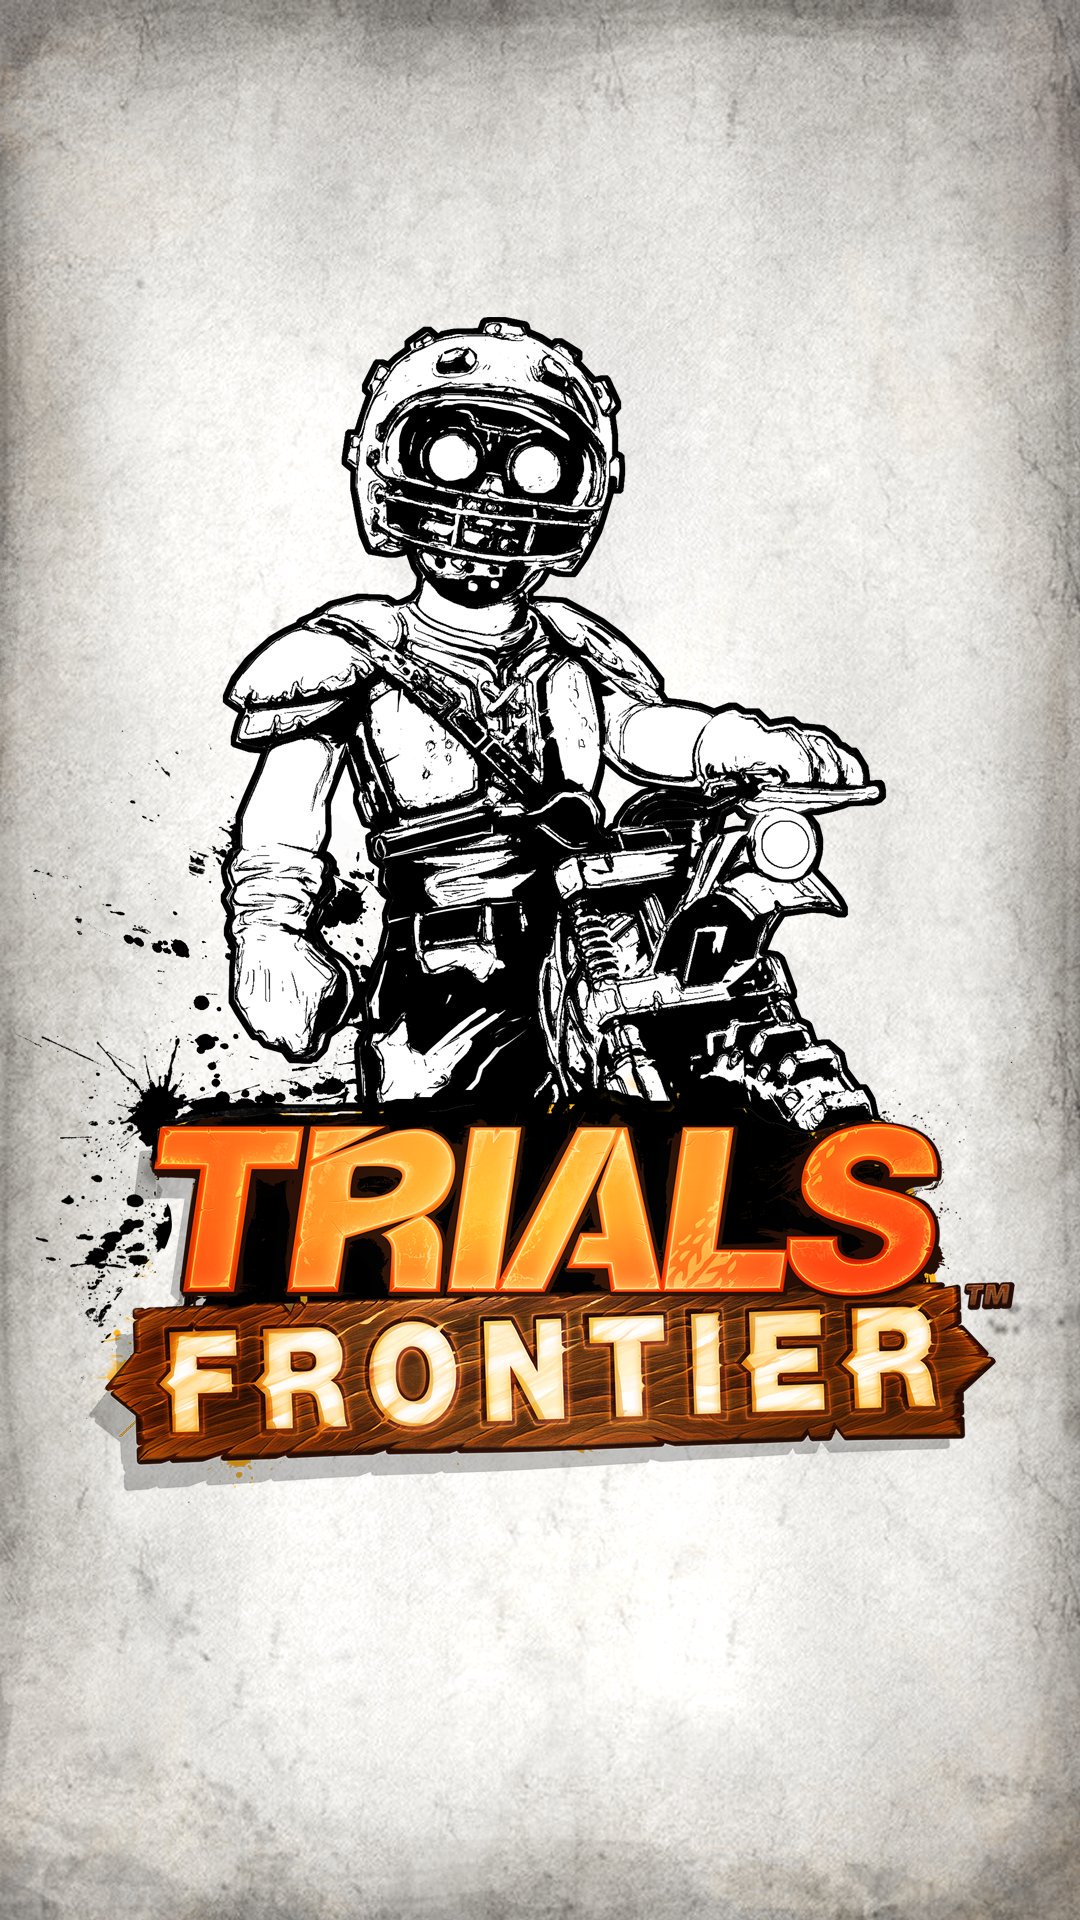 Trials frontier on get this classic trials frontier hd mobile wallpaper from httpstcoukszqd yall httpstcohdutmnqhv